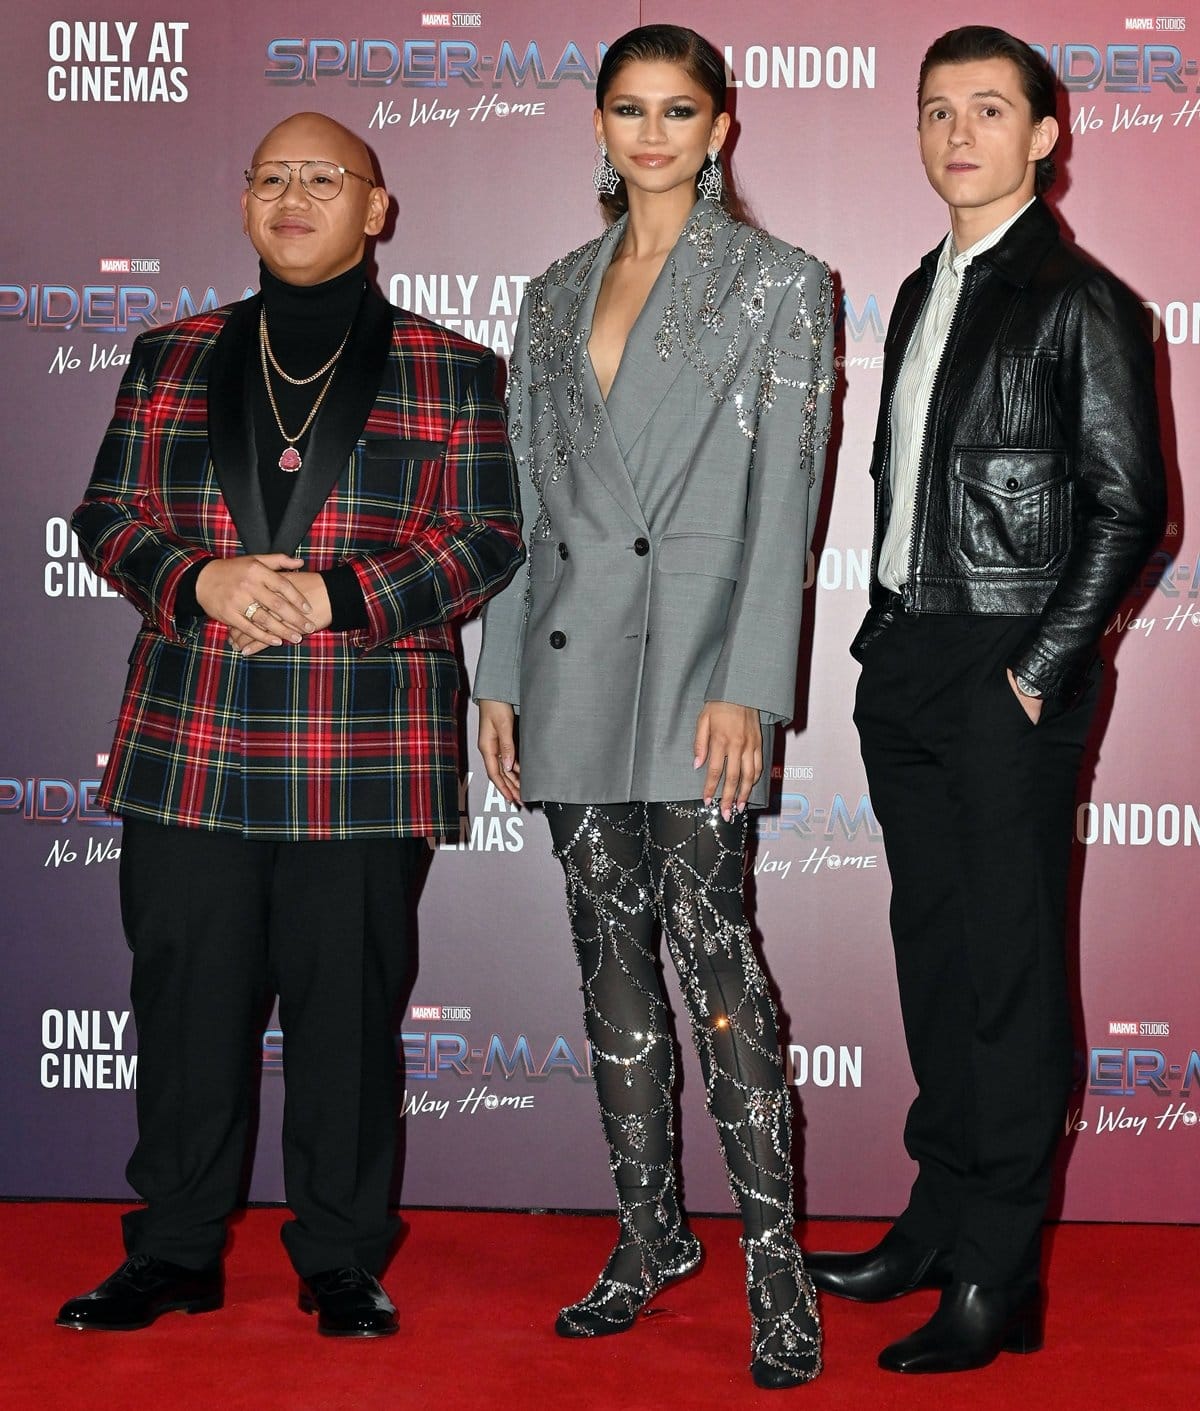 Zendaya towers over Jacob Batalon and her boyfriend Tom Holland at a photocall for Spider-Man: No Way Home